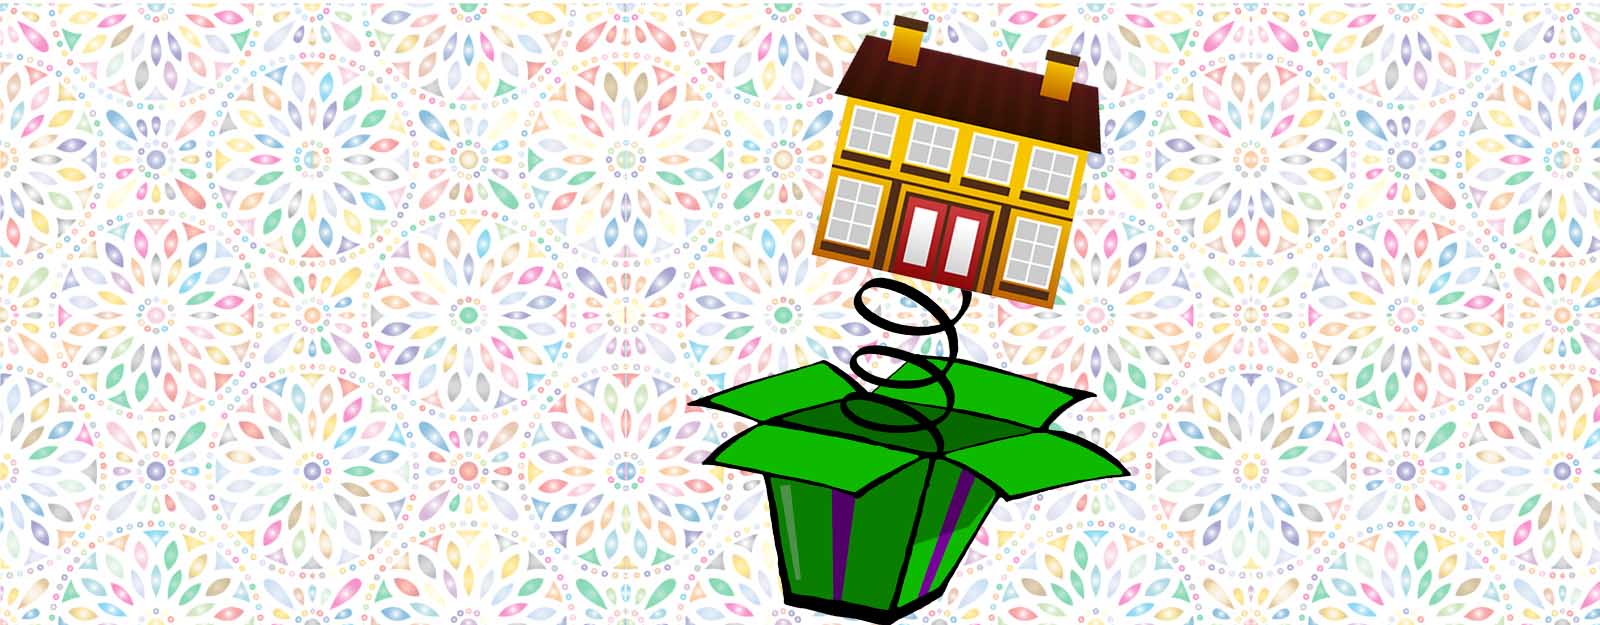 Graphic of a house popping out of a jack in the box style spring box. Floral pattern in background.